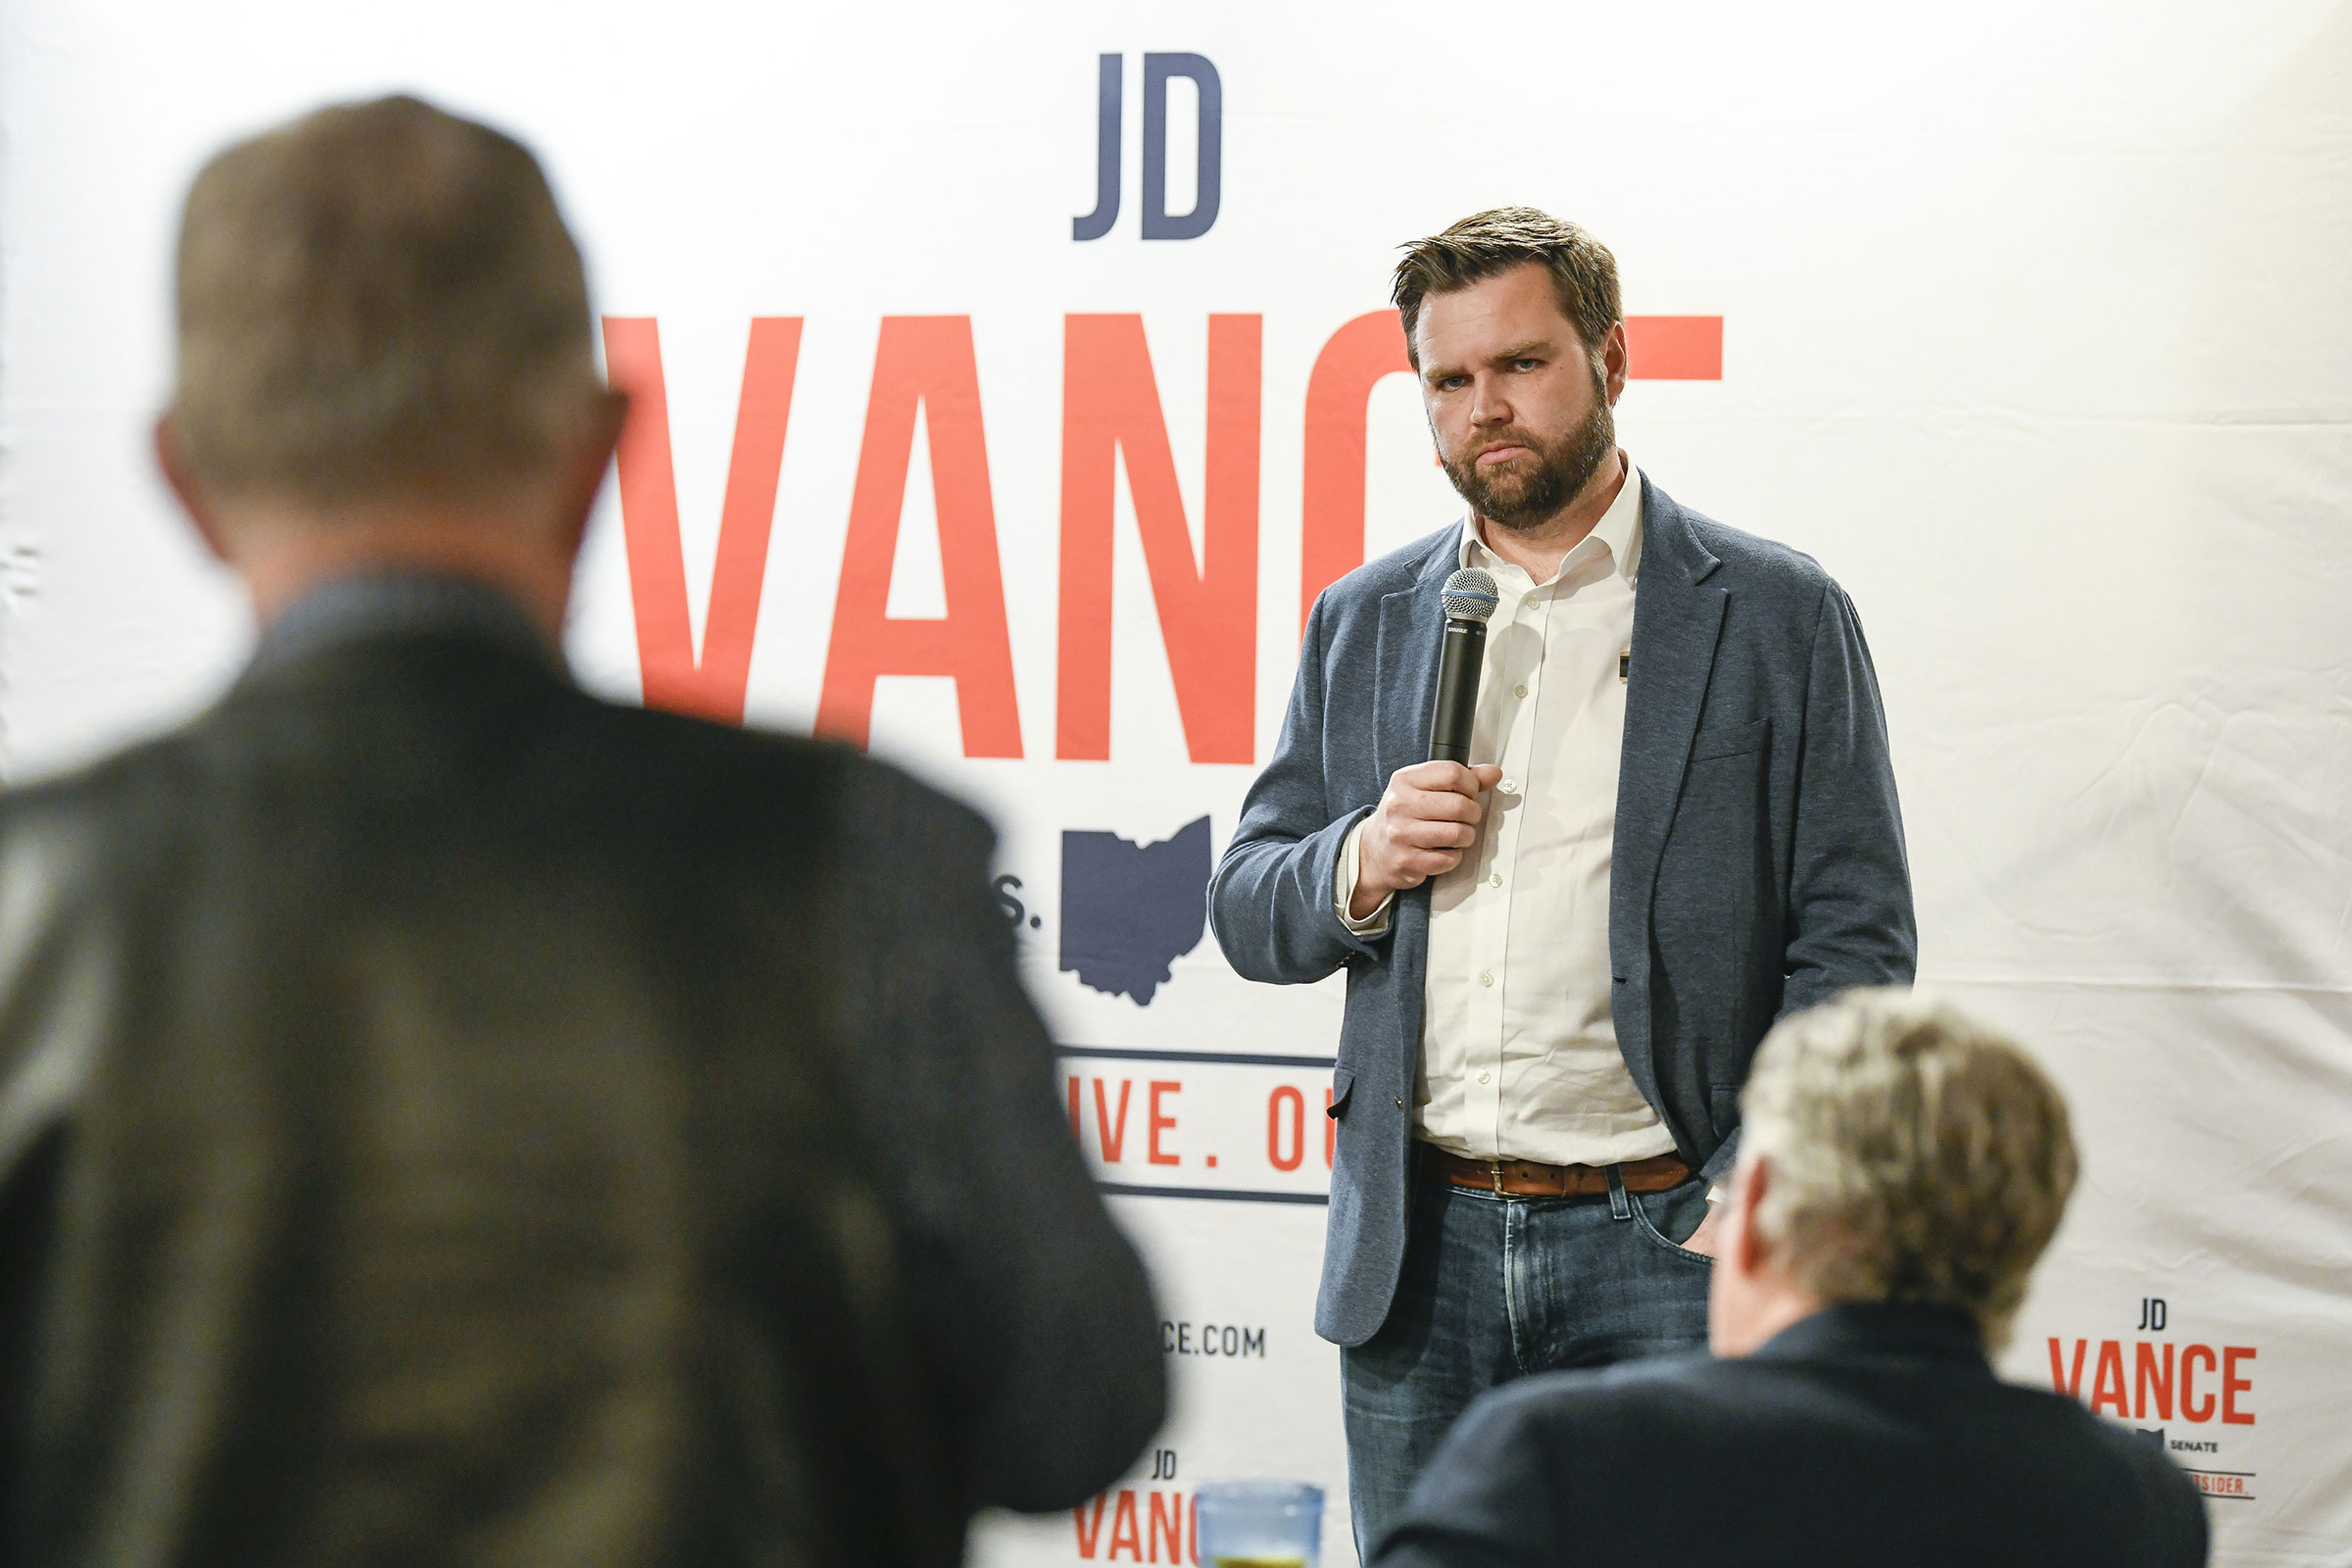 JD Vance, Republican Senate candidate for Ohio, during a campaign event in Huber Heights, Ohio, on Feb. 17, 2022. (Gaelen Morse—Bloomberg/Getty Images)